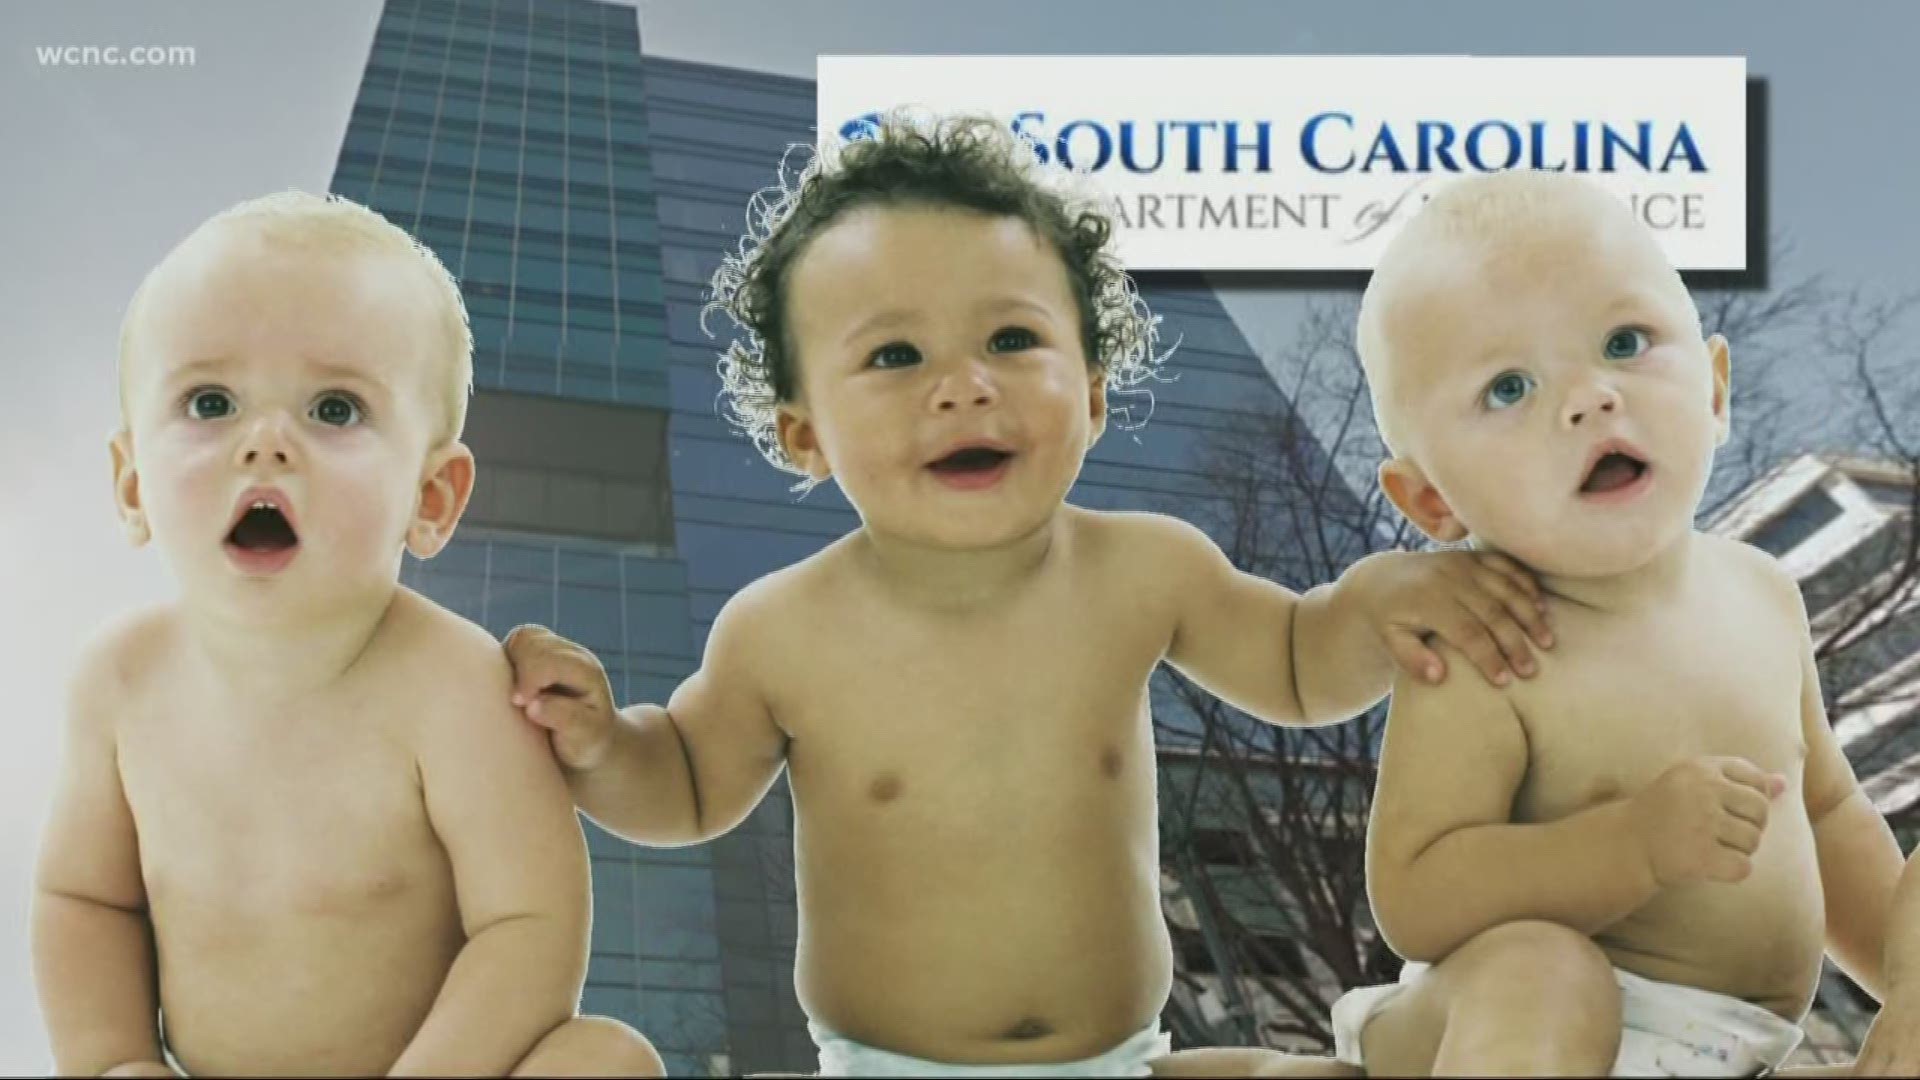 The South Carolina Department of Insurance is launching one of the most family-friendly work policies in the country.